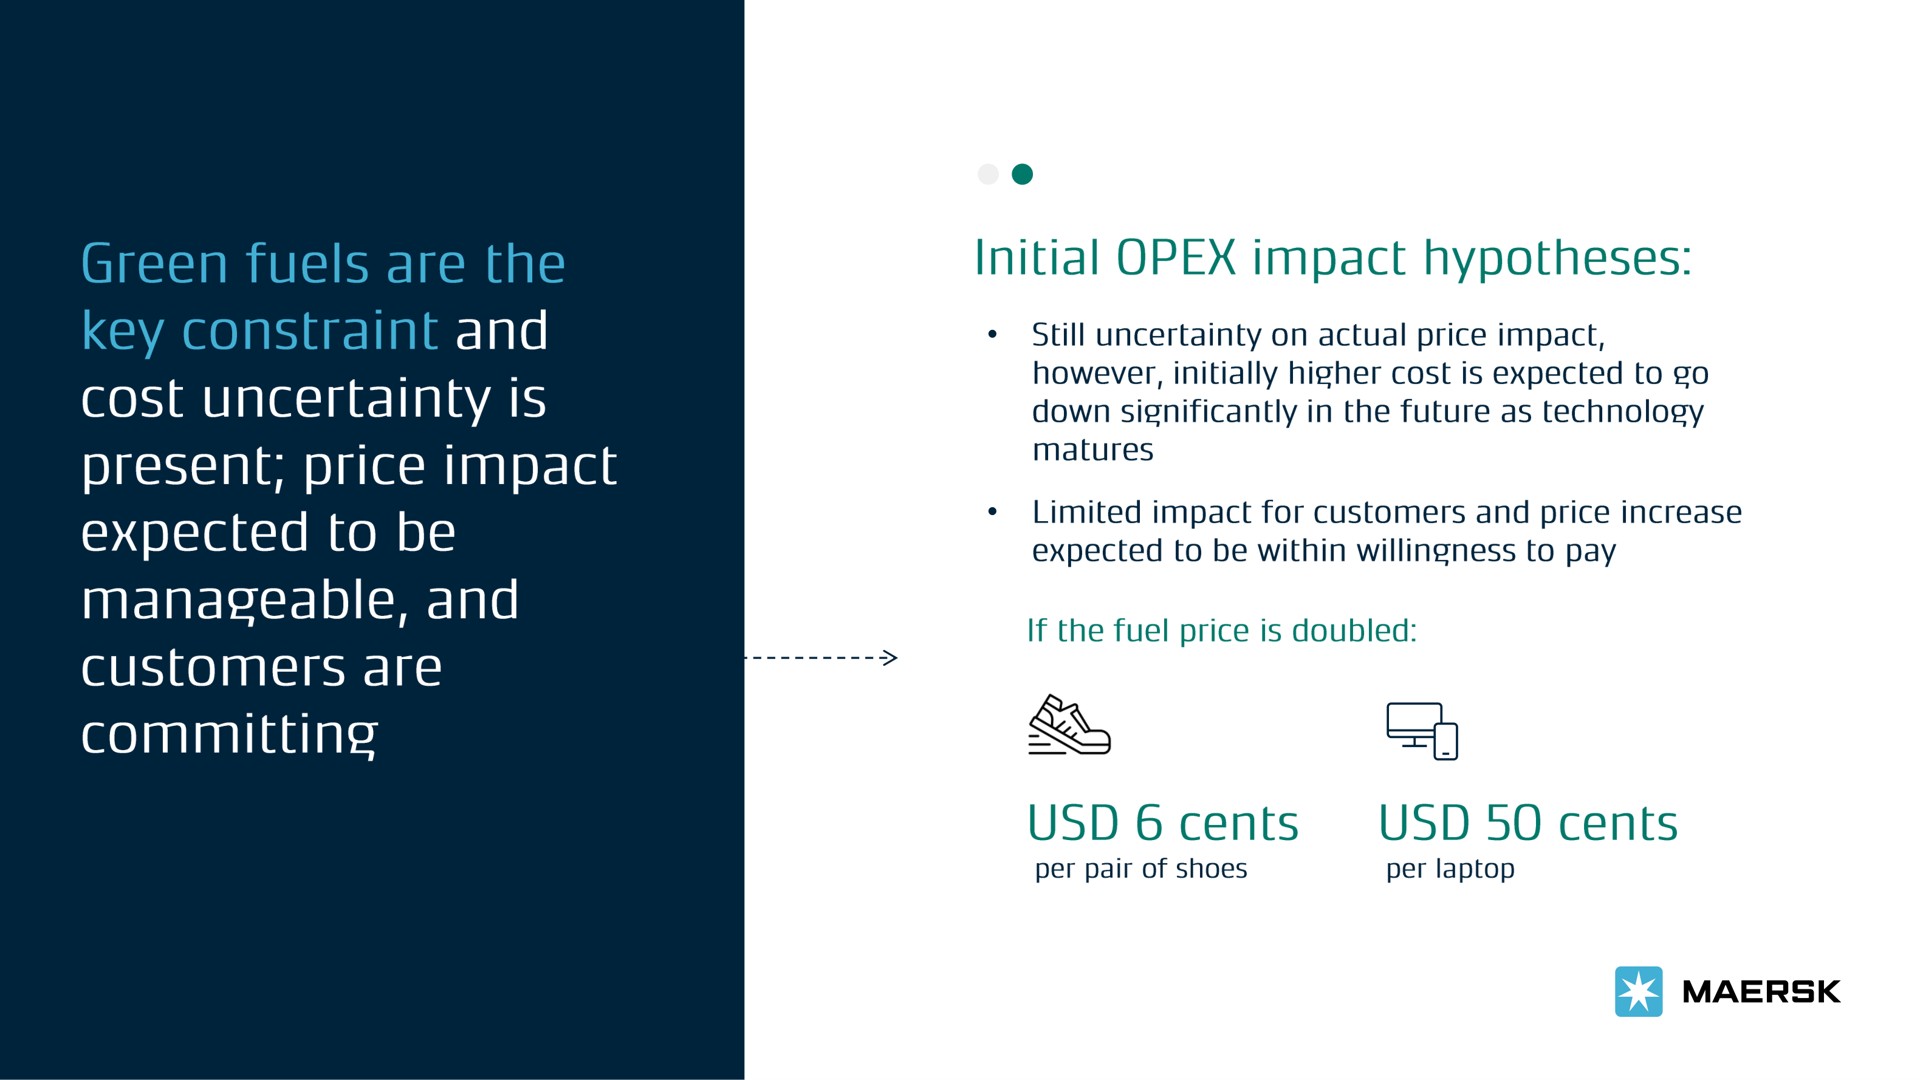 green fuels are the key constraint and cost uncertainty is present price impact expected to be manageable and customers are committing initial impact hypotheses cents cents | Maersk